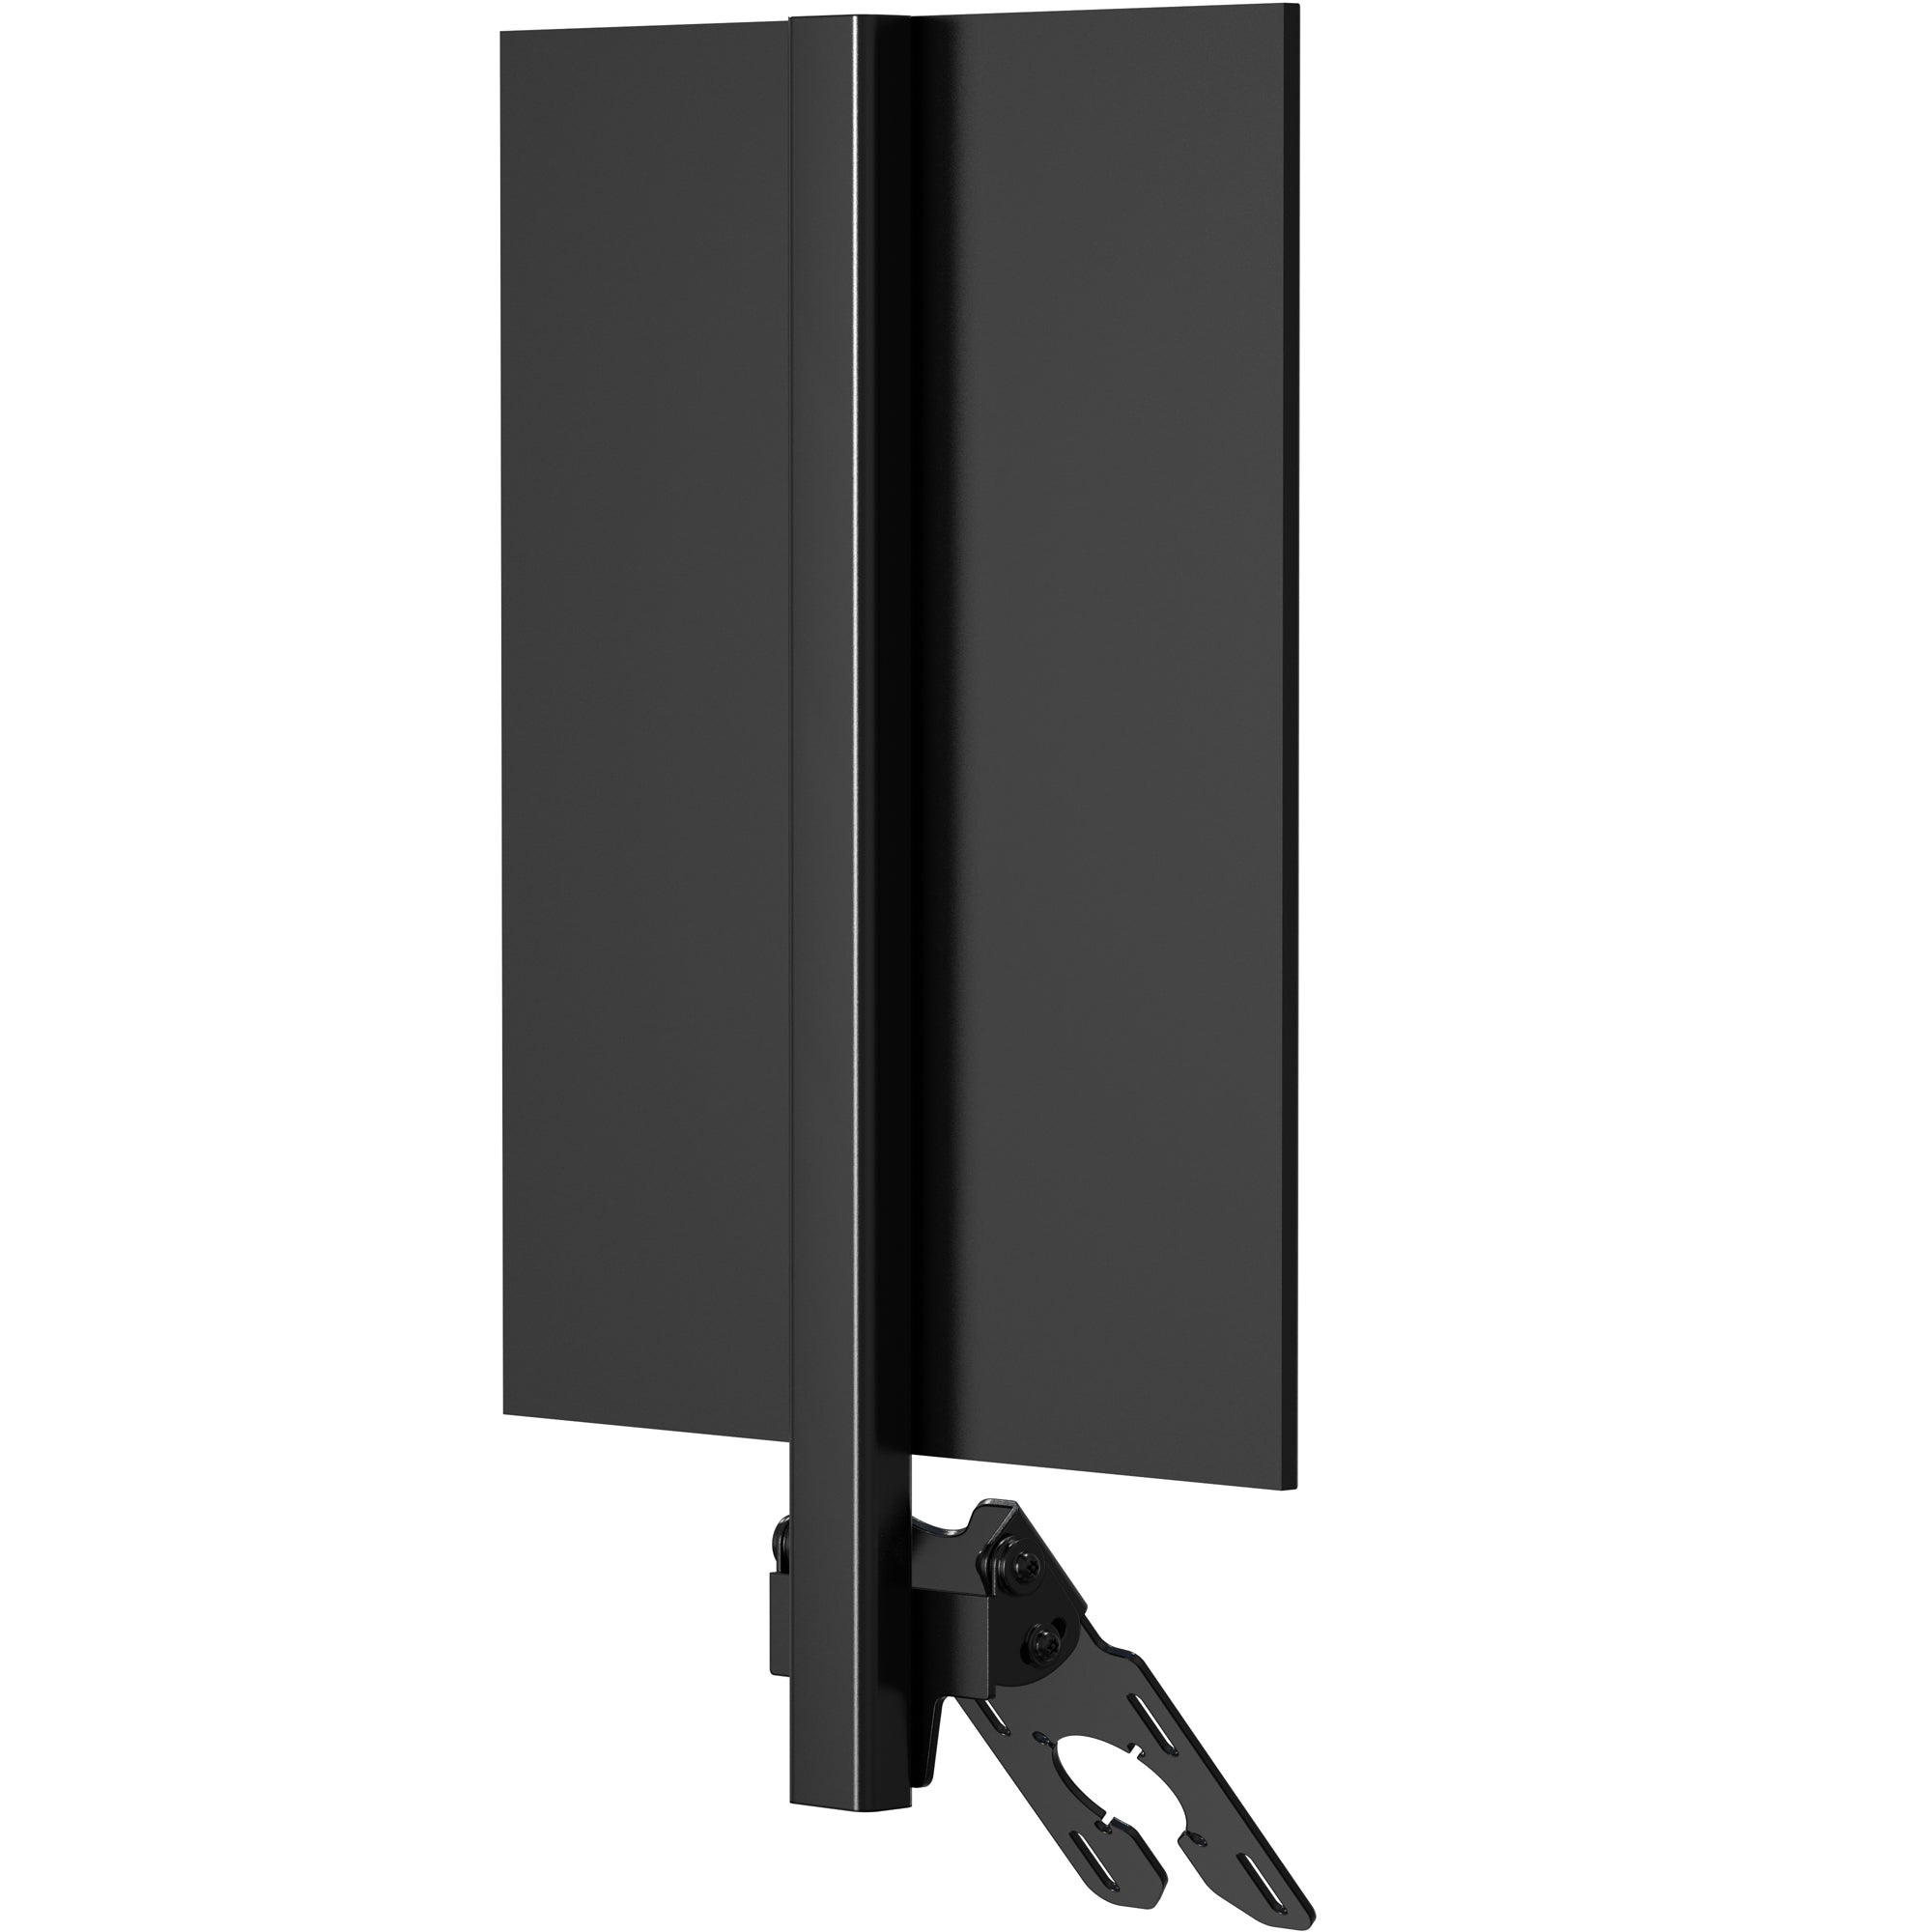 Add-On Graphic and Bracket for CTA Floor Stands